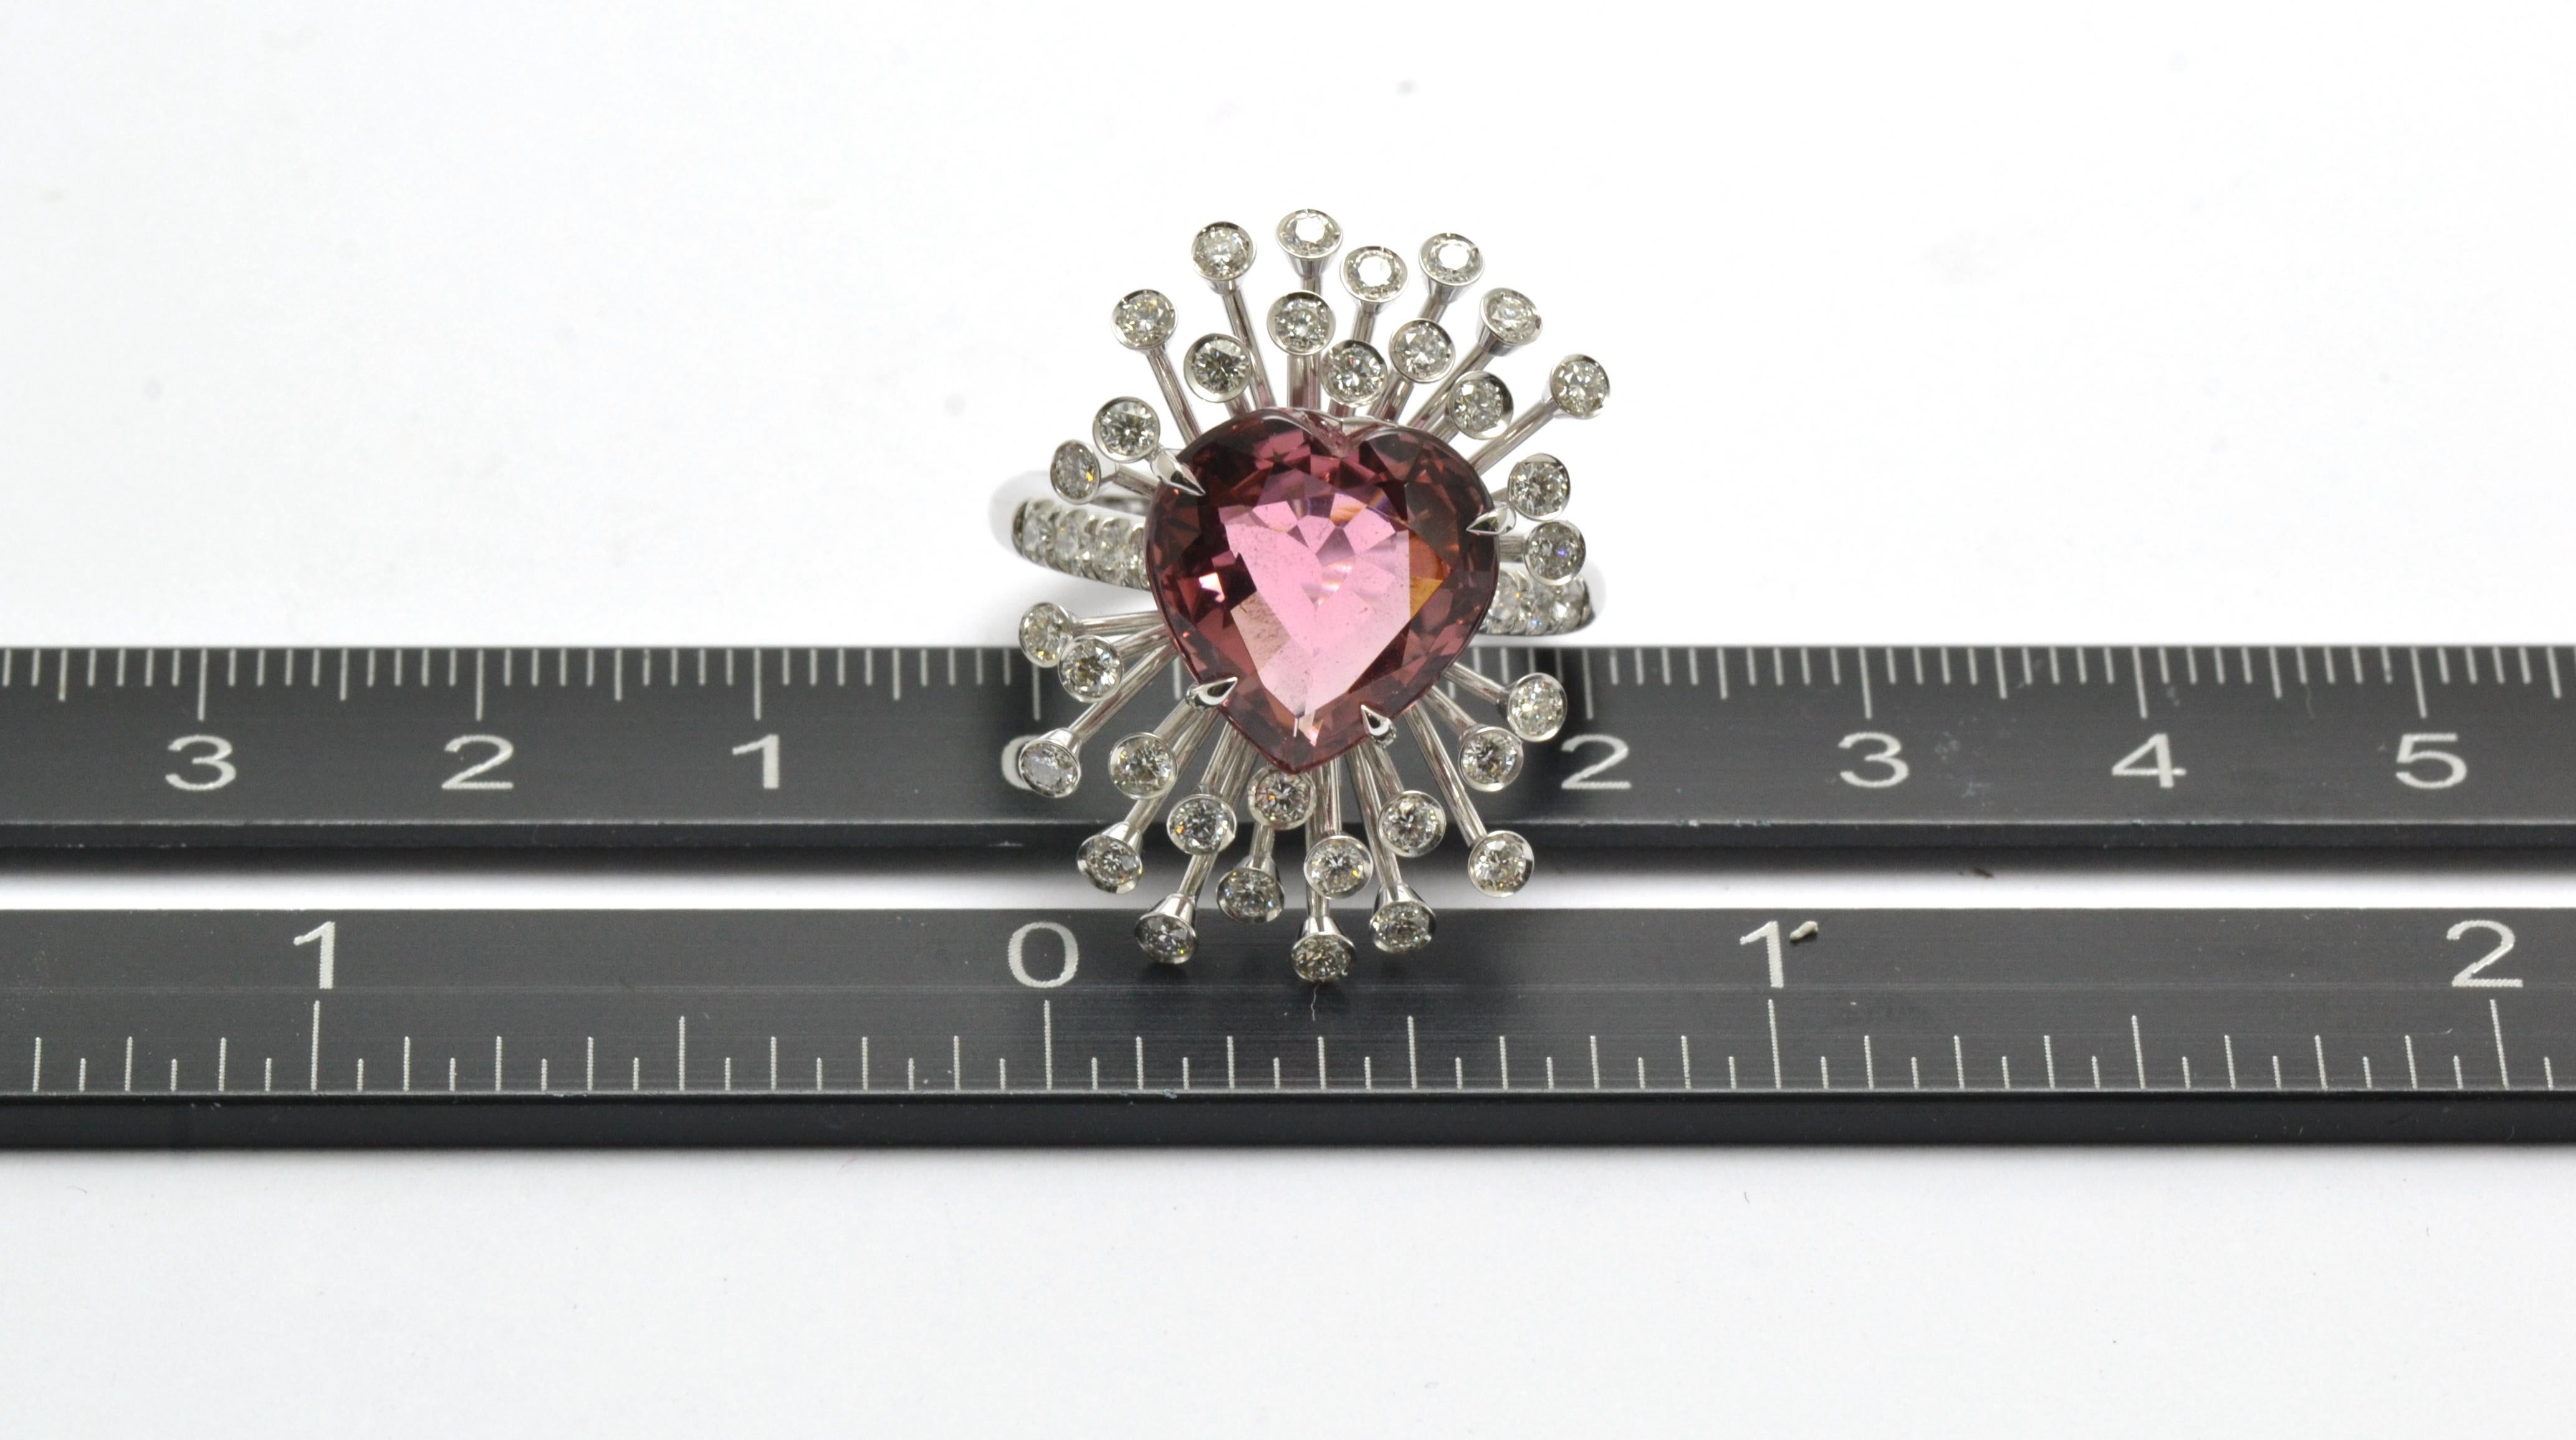 Stunning Spray design ring.  
The pavé diamond set band is supending a spray of diamonds highlighting the central pink tourmaline, heart cut.
Very suitable as engagement ring too.
We can size it and customize engraving a date or initials. 

18 KT